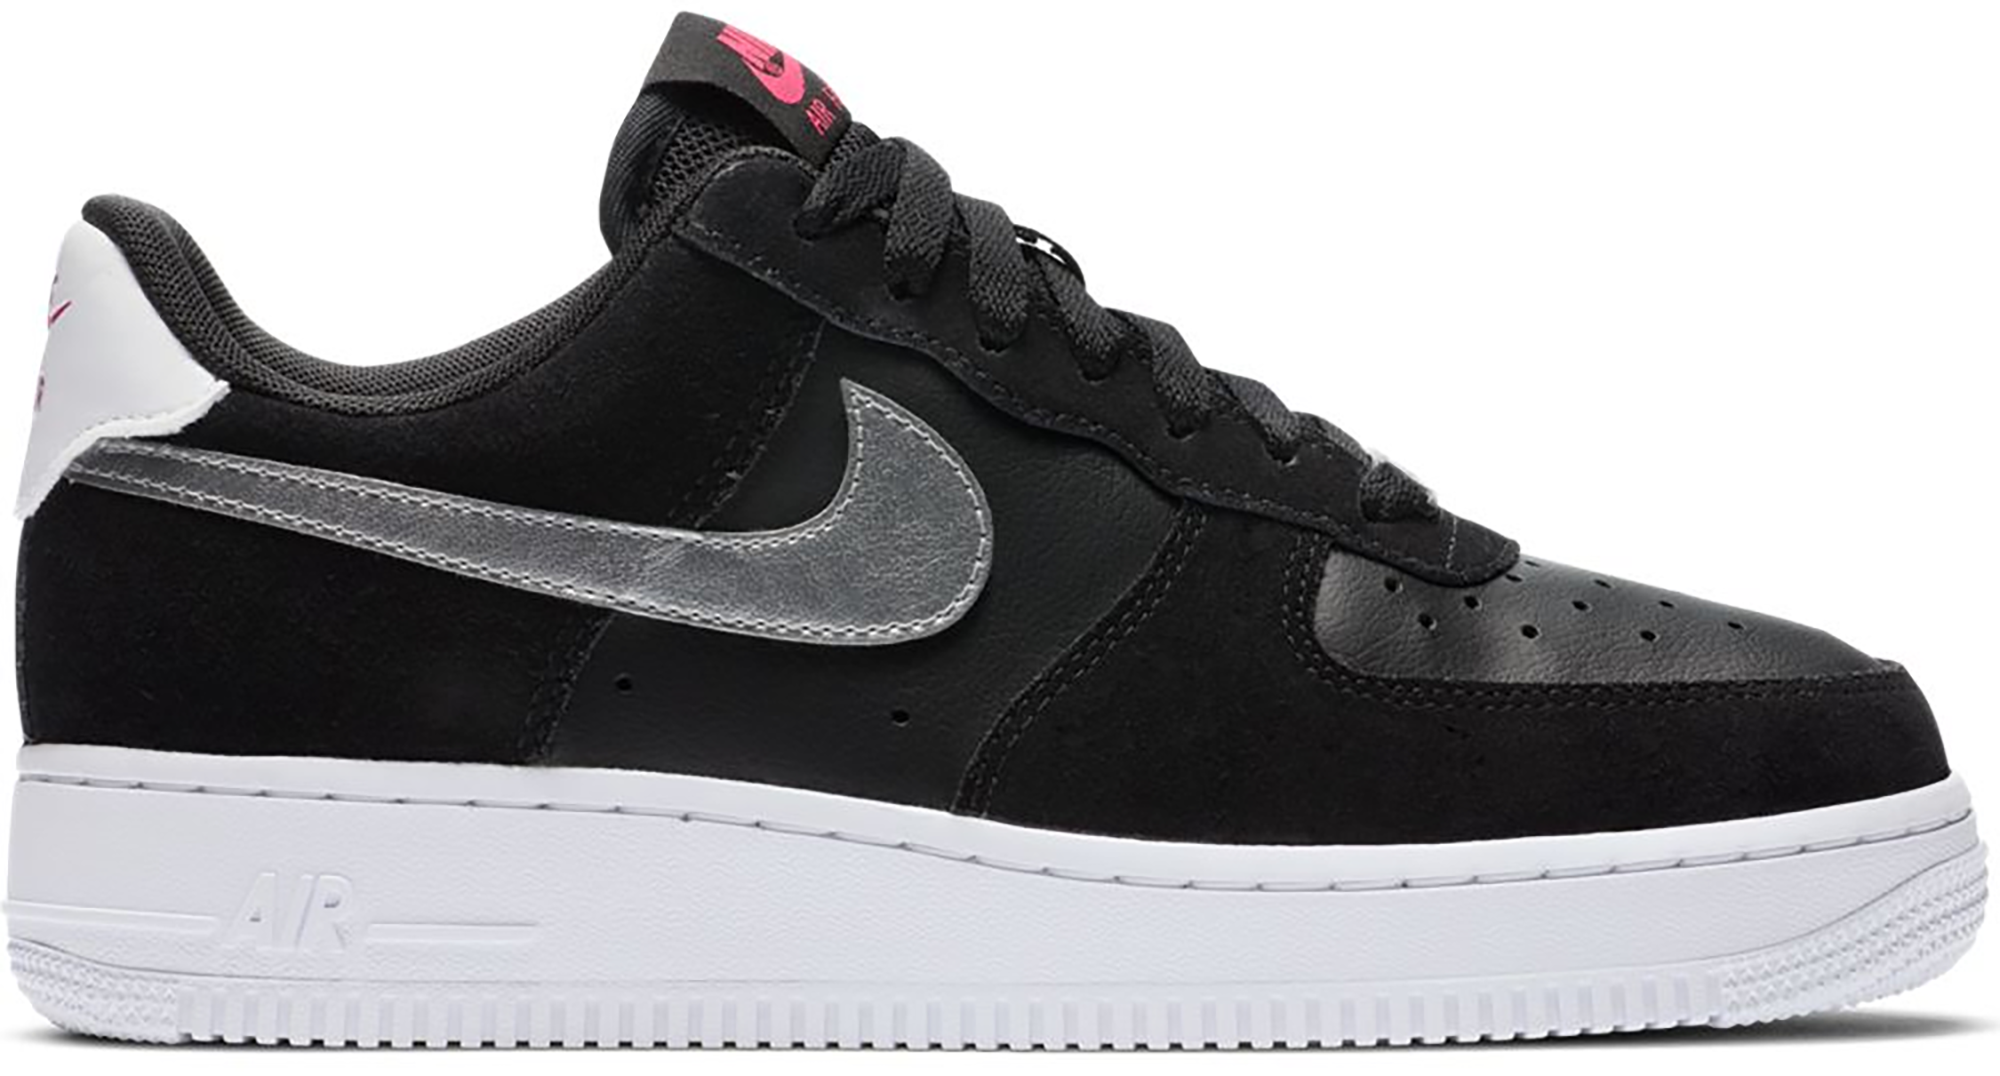 black and pink nike air force 1